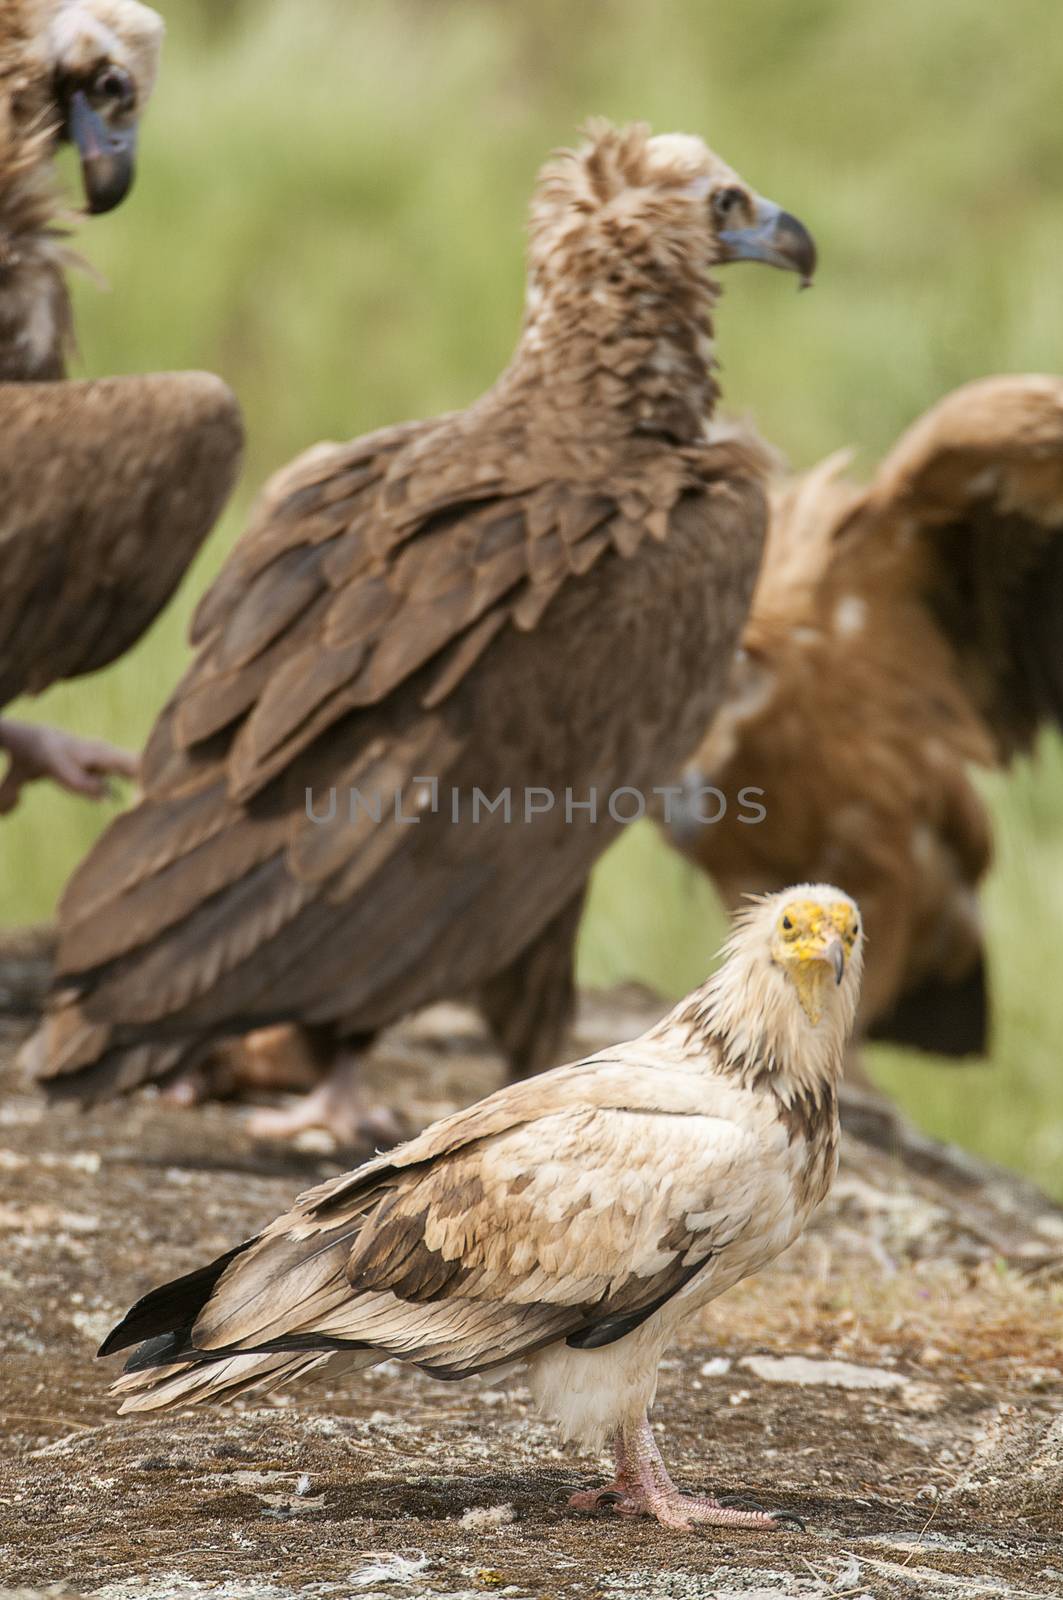 Egyptian Vulture (Neophron percnopterus), Cinereous Vulture Aegy by jalonsohu@gmail.com